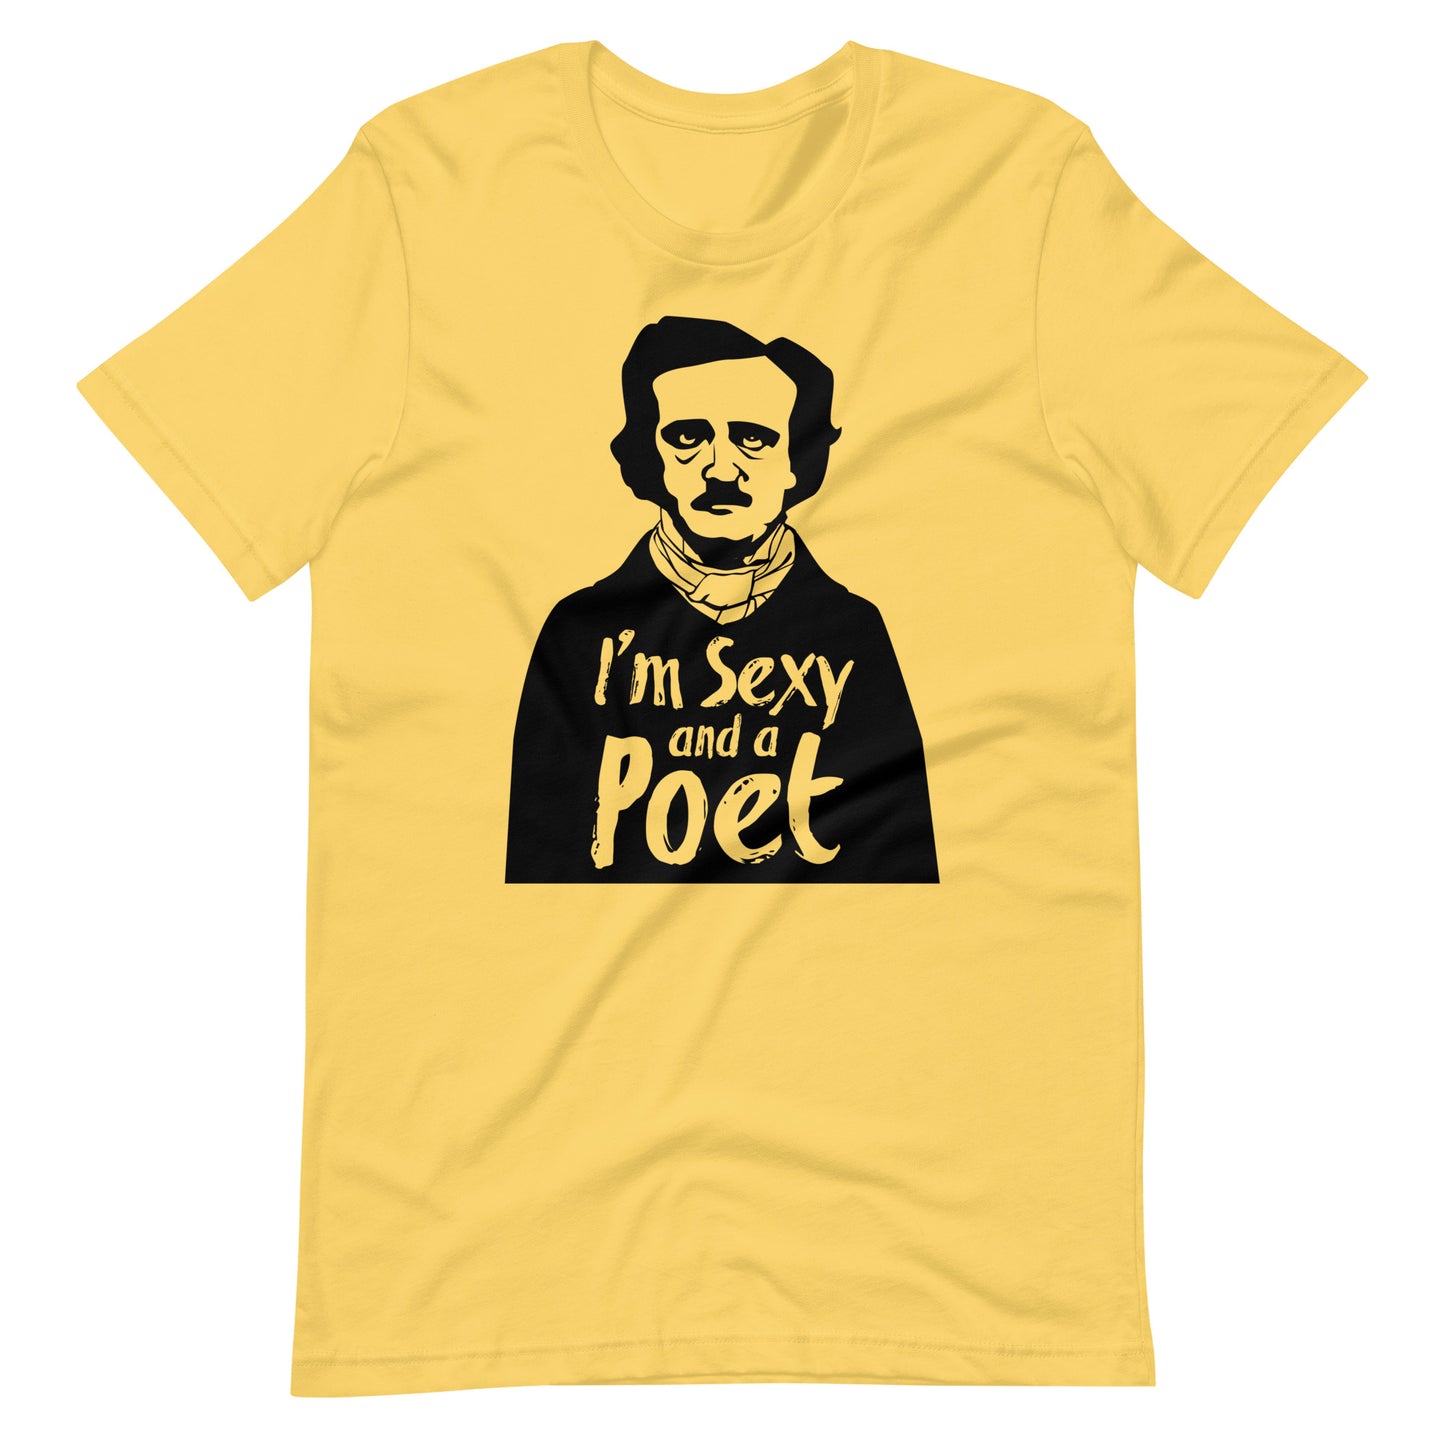 Women's Edgar Allan Poe "I'm Sexy and a Poet" t-shirt - Yellow Front